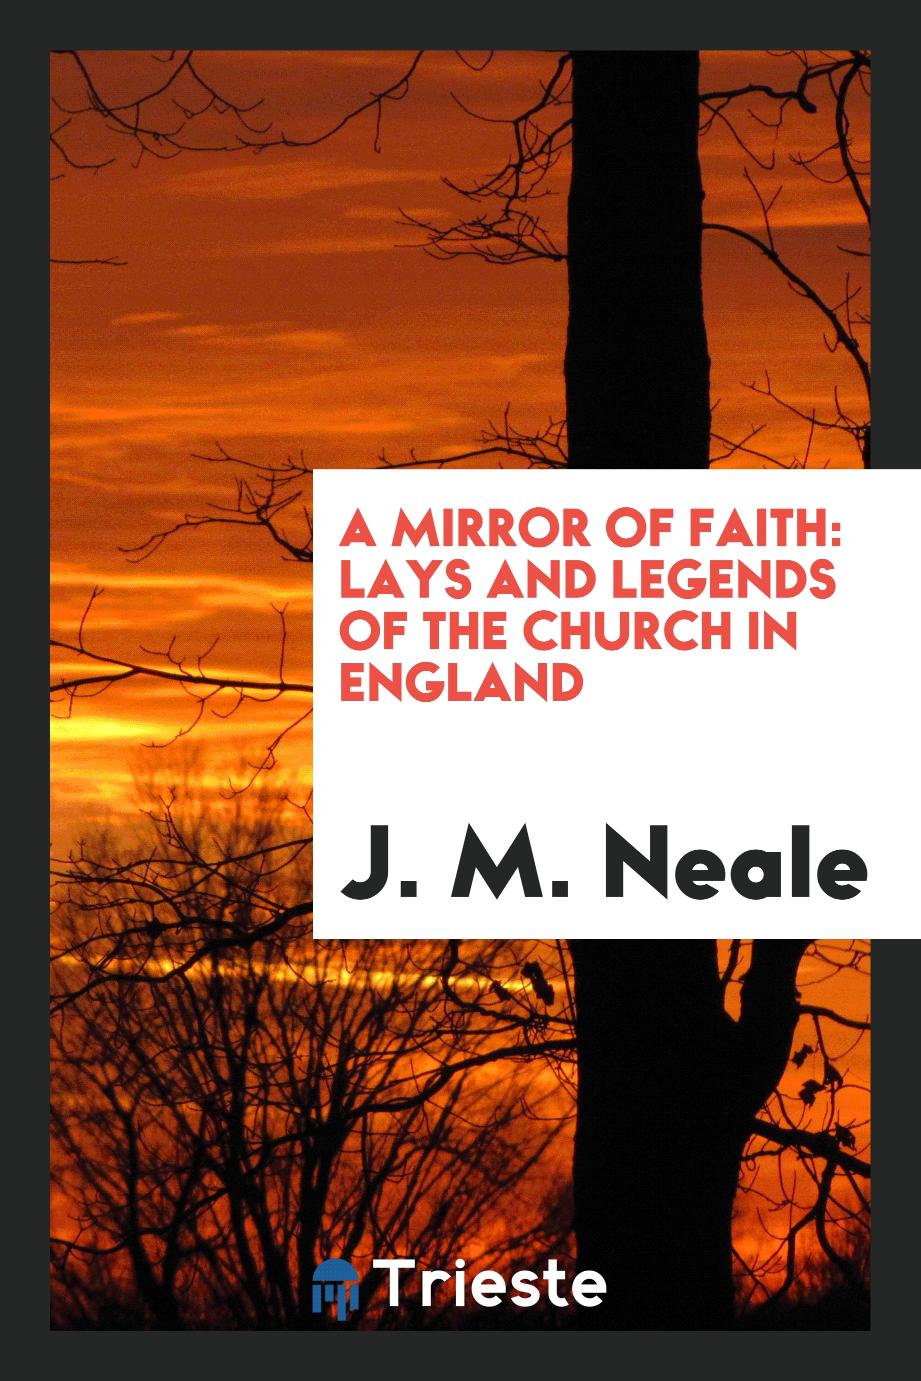 A mirror of faith: lays and legends of the Church in England